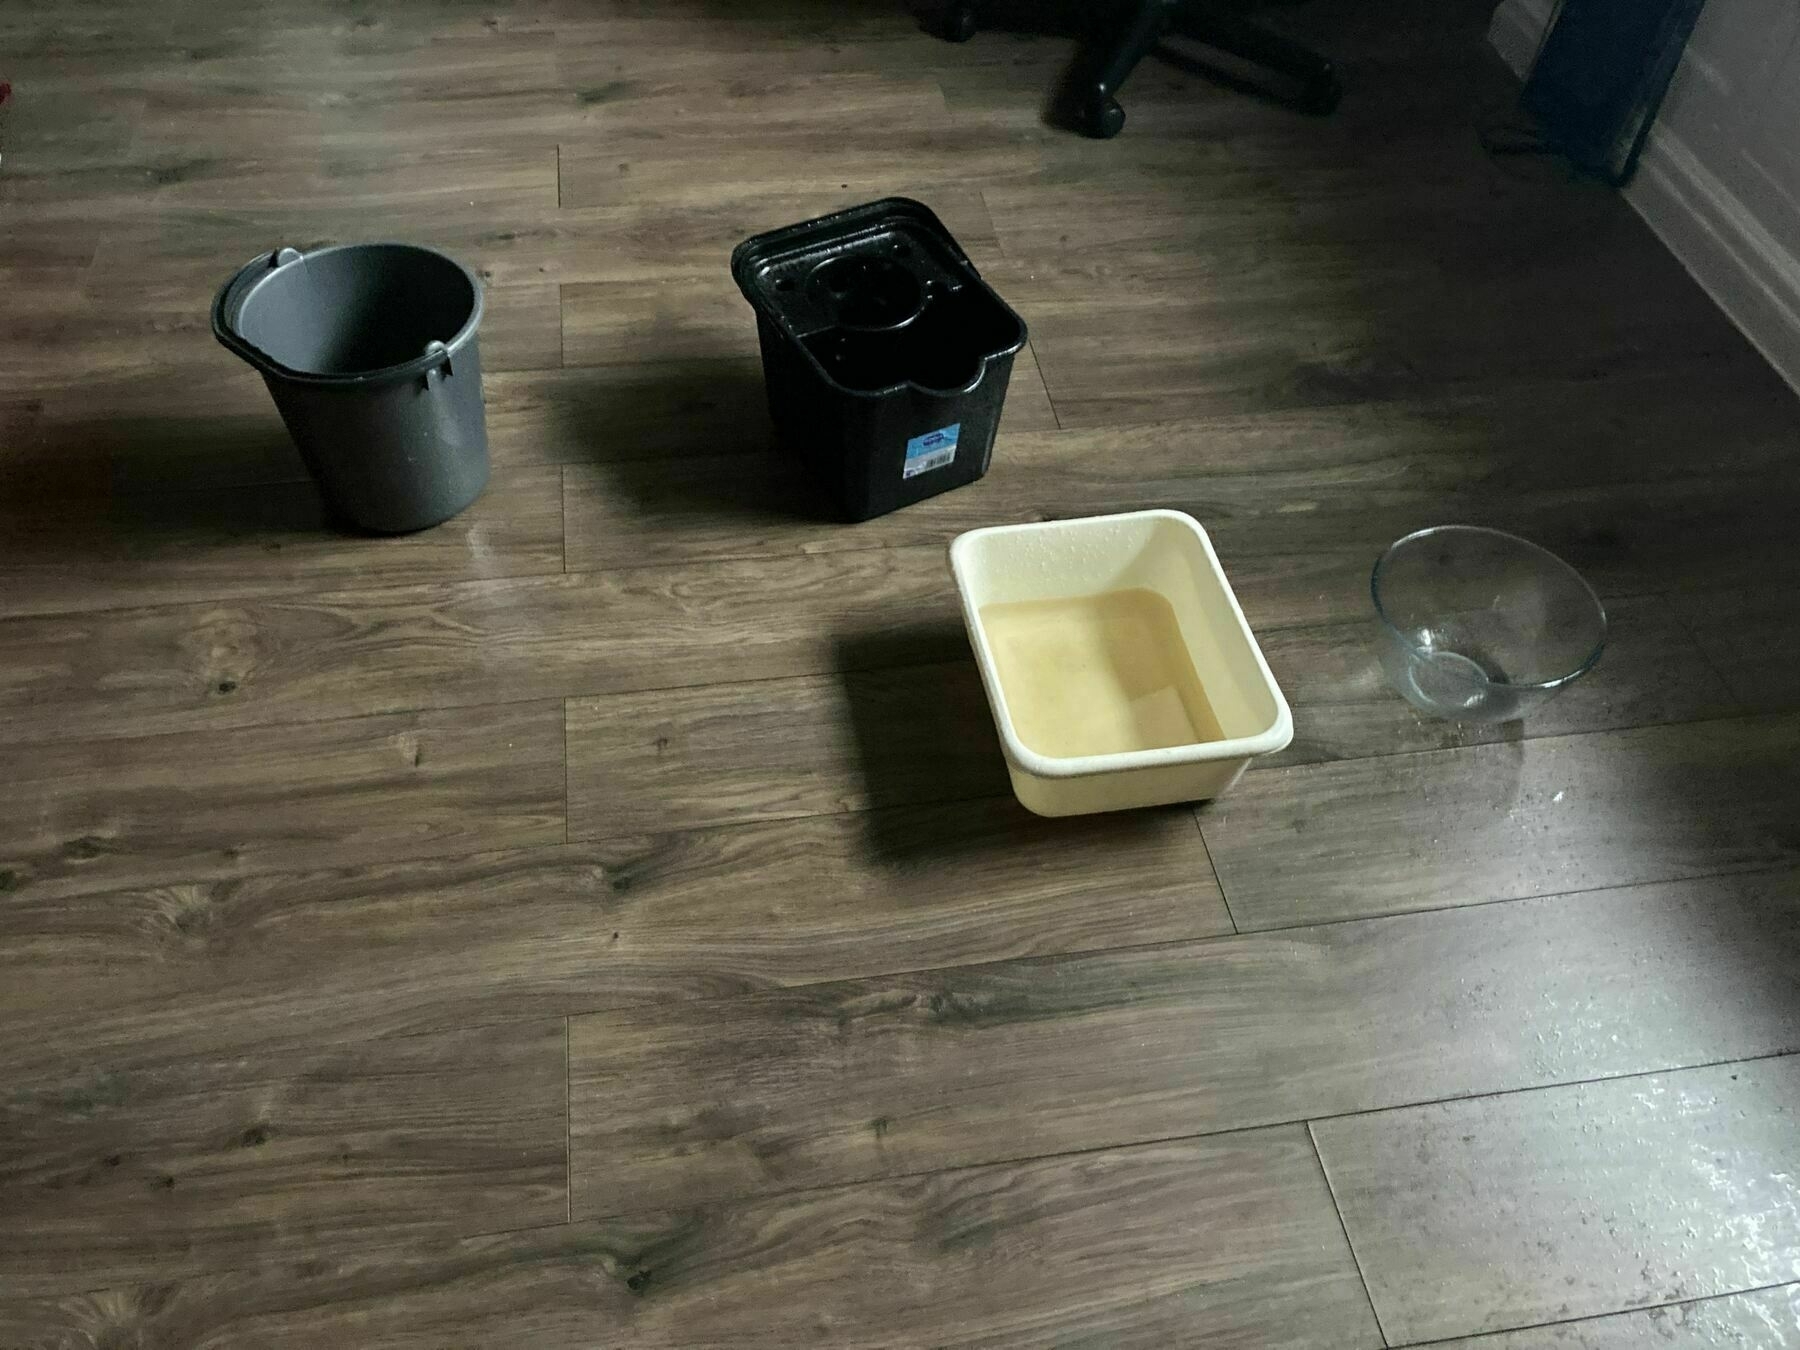 Two buckets and two bowls arranged on the floor to catch water from a leaking roof.